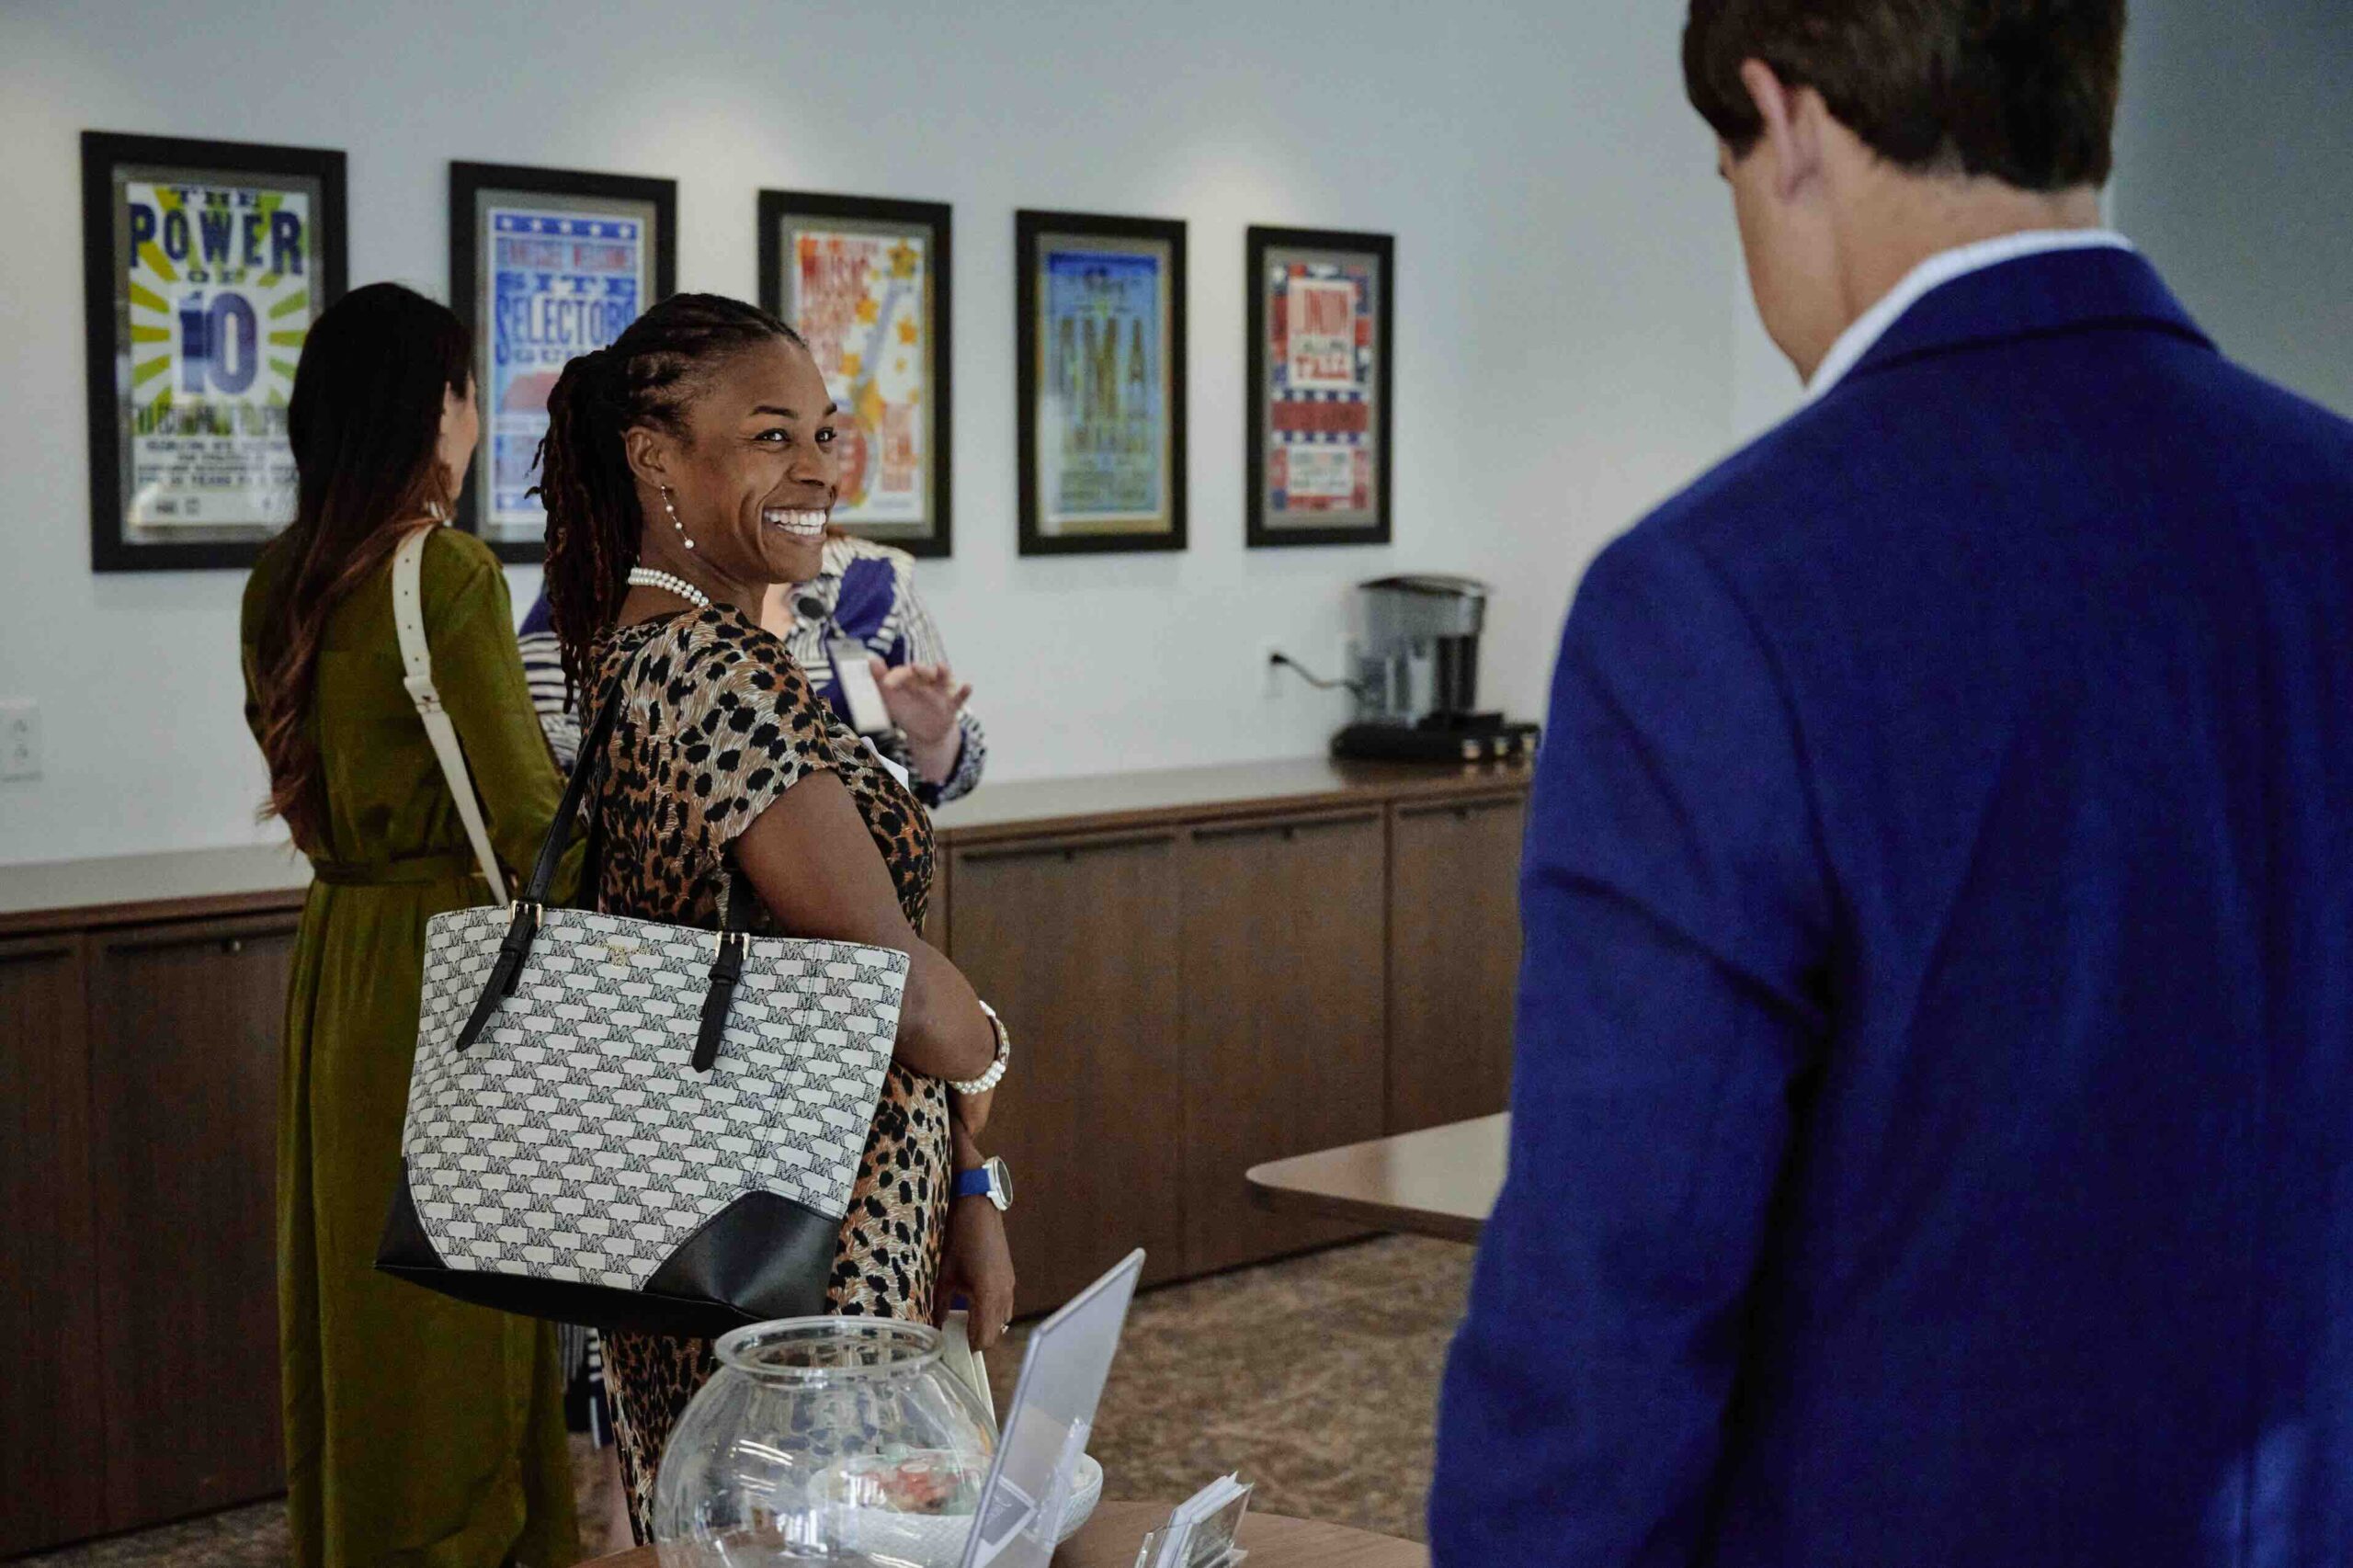 A professional encounter: a woman with a cheerful expression holding a designer tote bag exchanges a conversation with a man in a blue blazer in an office environment adorned with colorful posters on the wall.